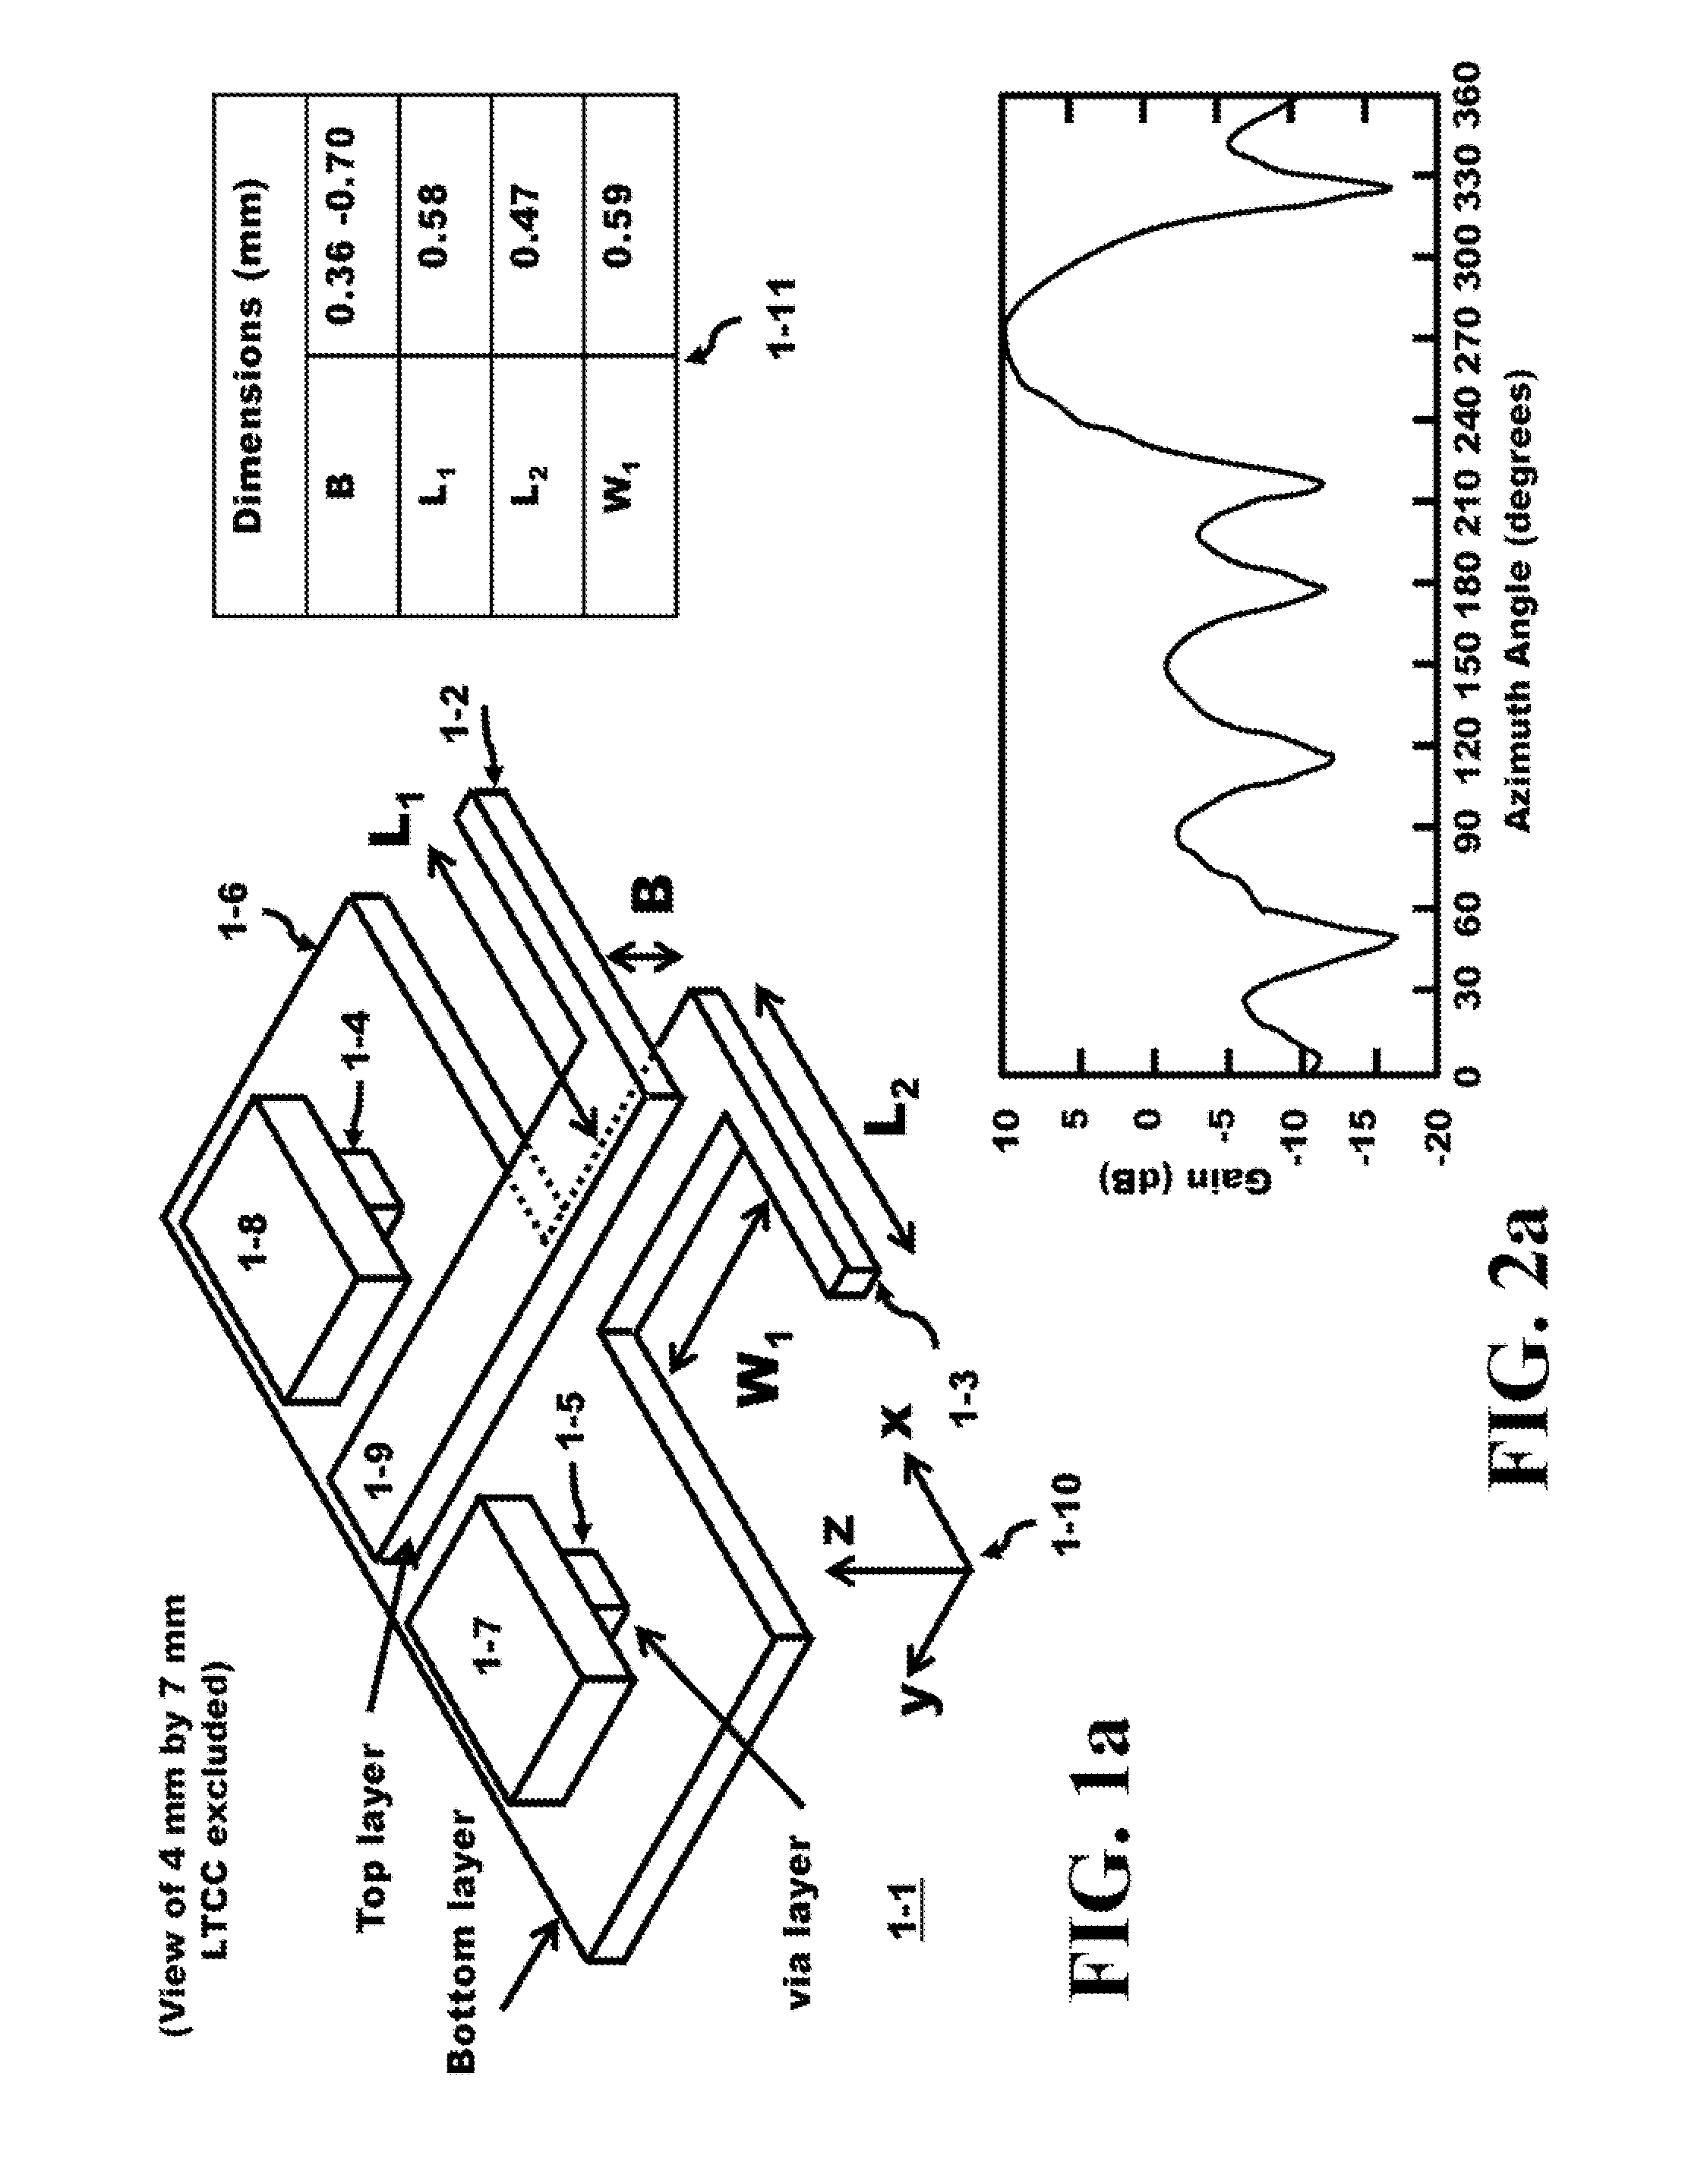 Method and Apparatus for a 60 GHz Endfire Antenna